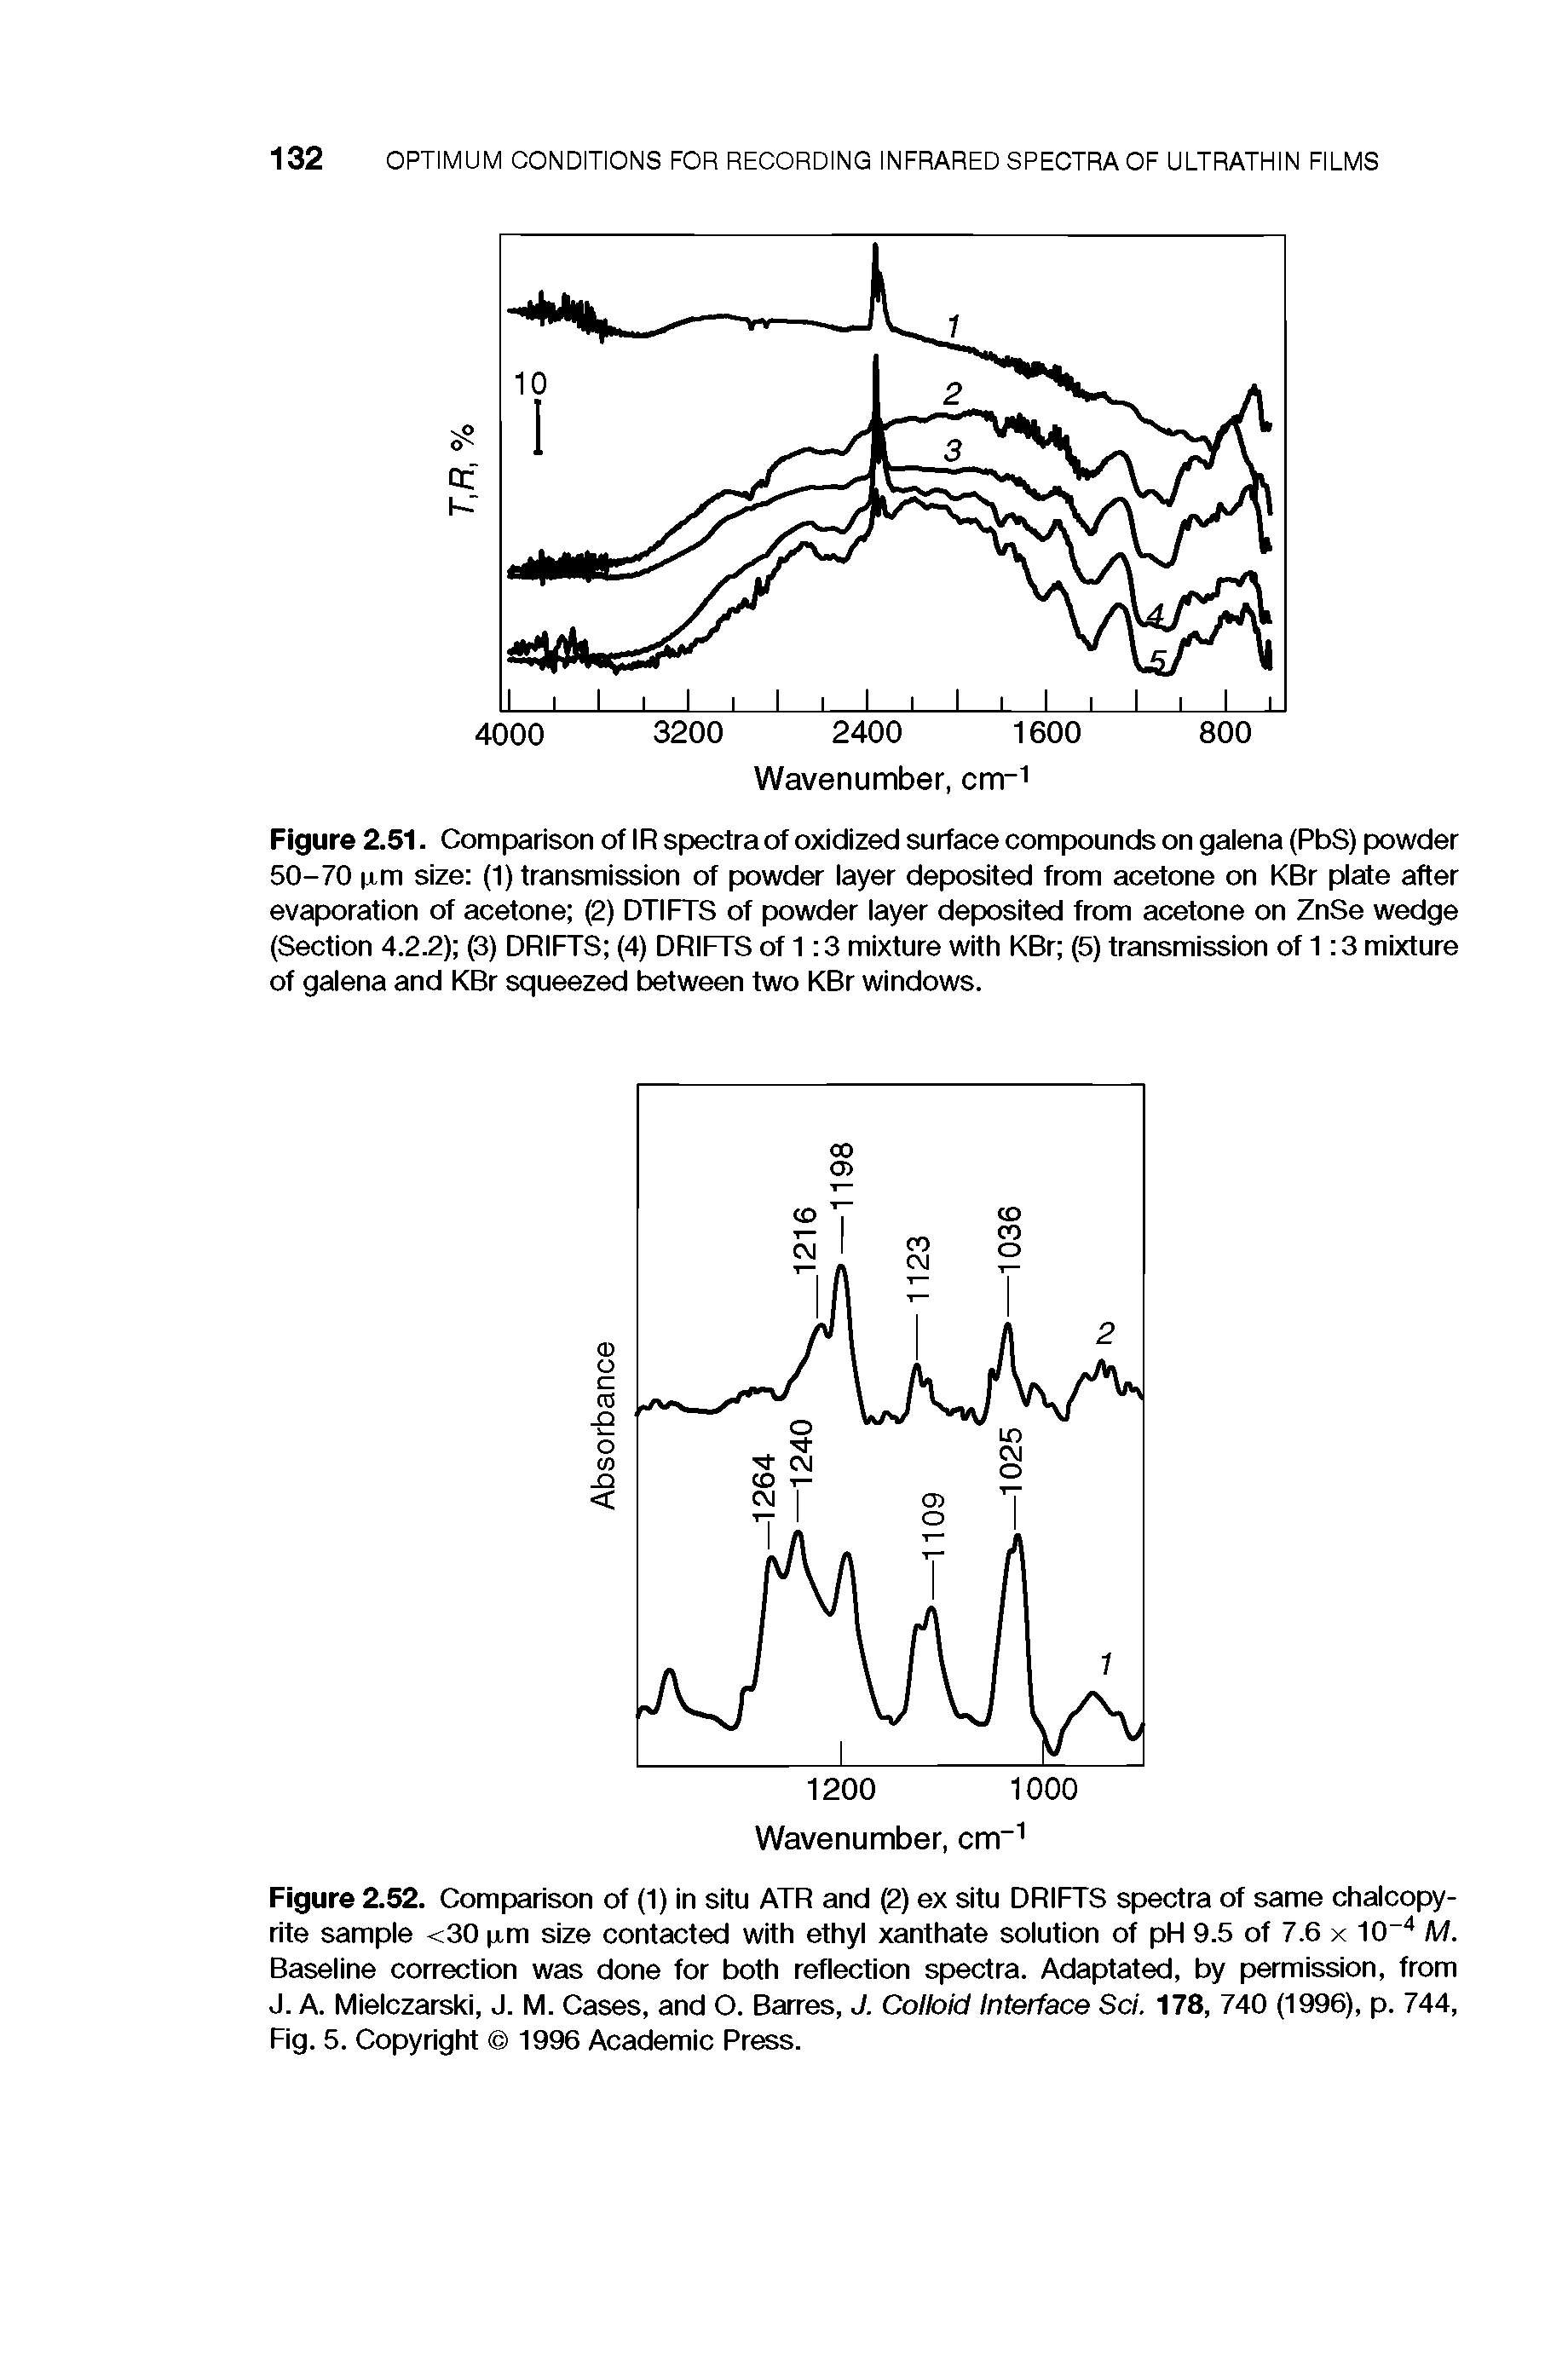 Figure 2.51. Comparison of IR spectra of oxidized surface compounds on galena (PbS) powder 50-70 M-m size (1) transmission of powder layer deposited from acetone on KBr plate after evaporation of acetone (2) DTIFTS of powder layer deposited from acetone on ZnSe wedge (Section 4.2.2) (3) DRIFTS (4) DRIFTS of 1 3 mixture with KBr (5) transmission of 1 3 mixture of galena and KBr squeezed between two KBr windows.